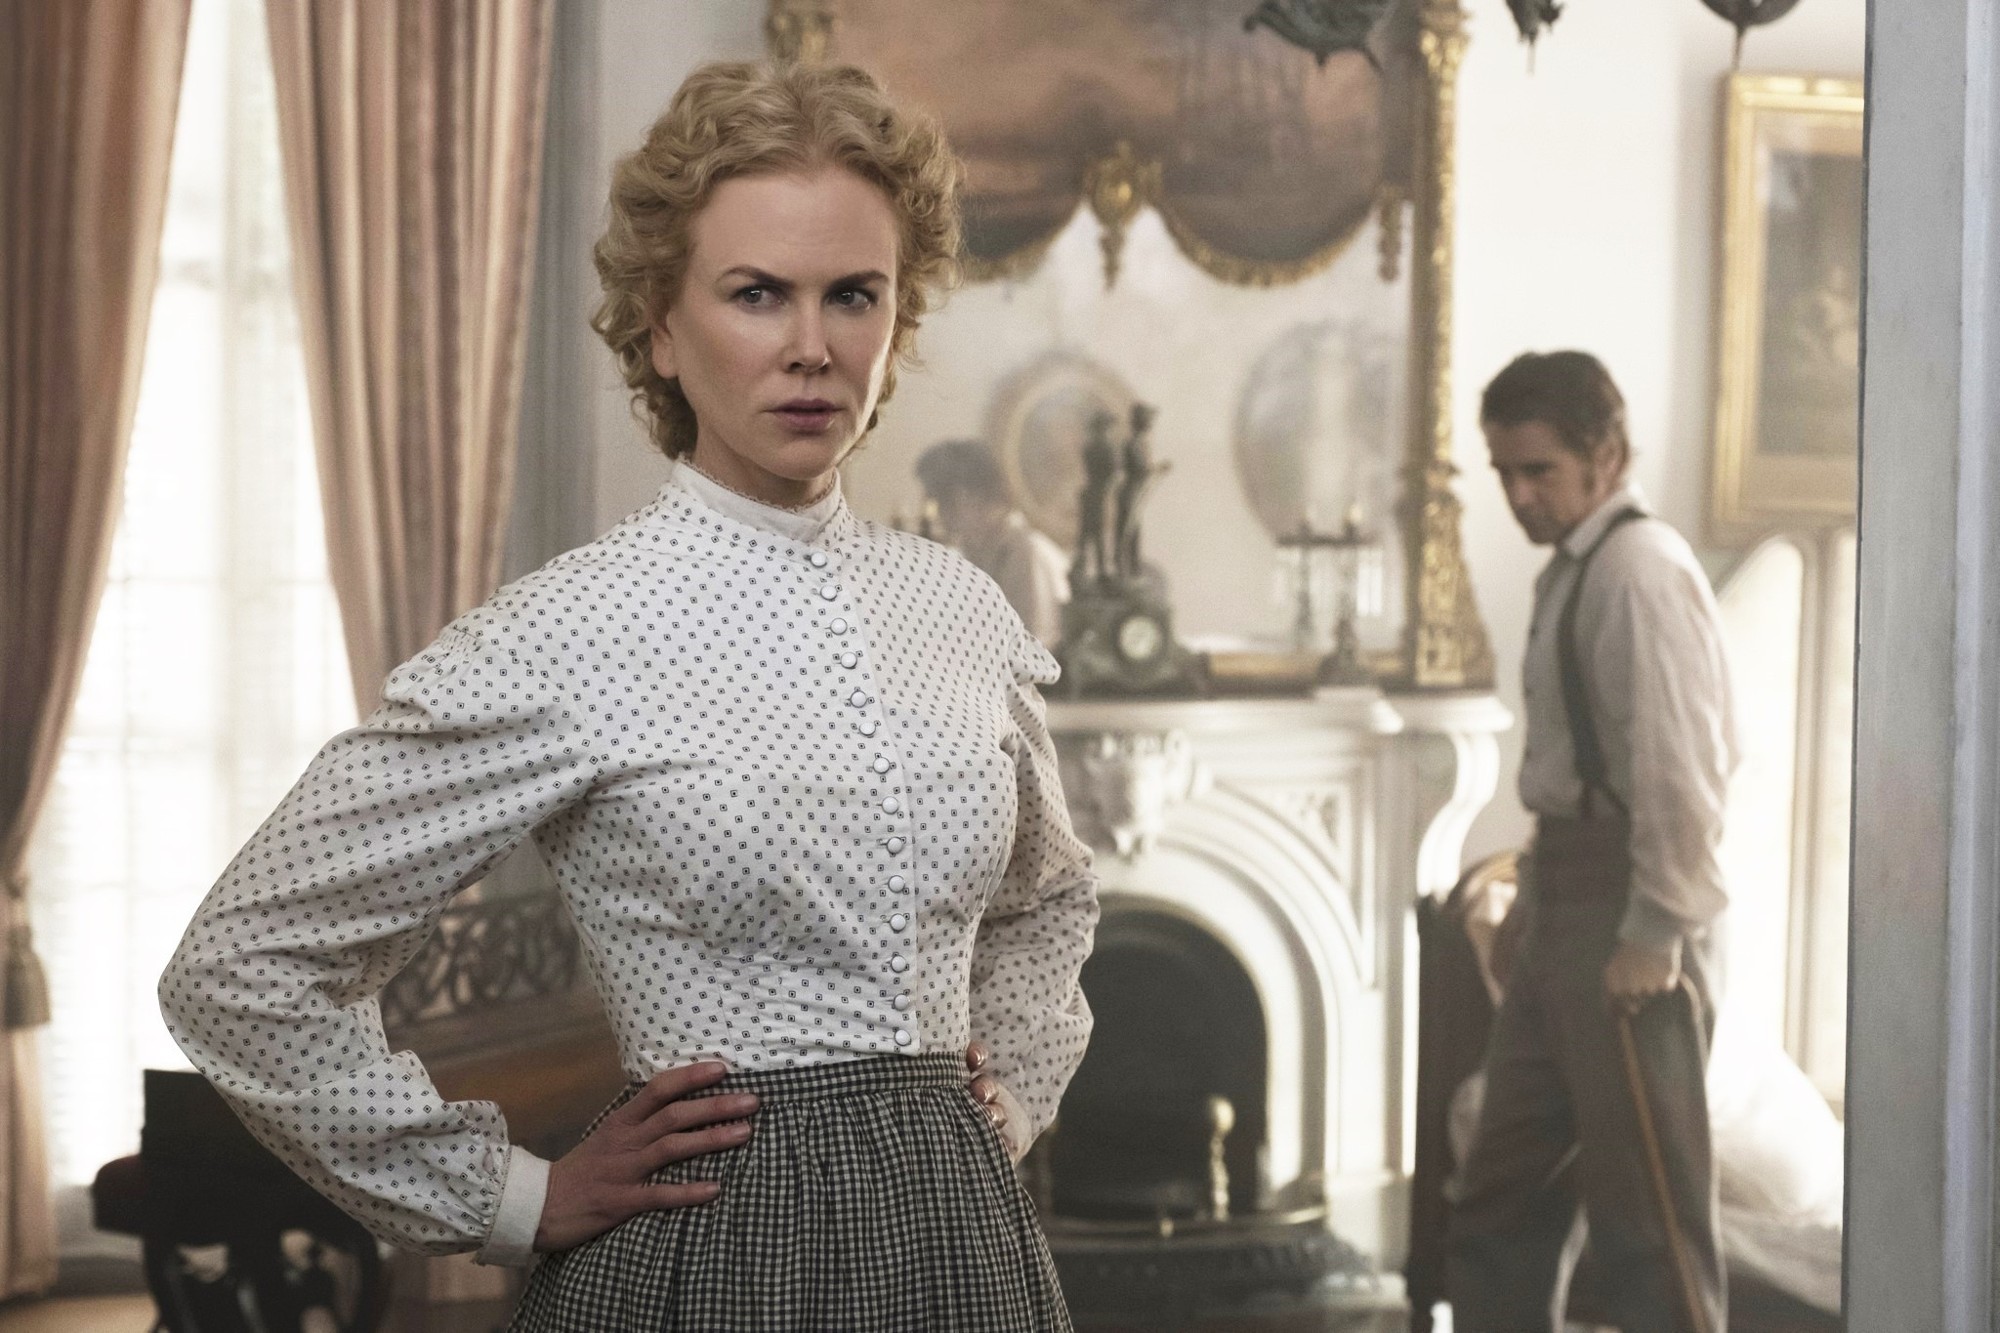 Nicole Kidman stars as Martha Farnsworth and Colin Farrell stars as John McBurney in Focus Features' The Beguiled (2017)